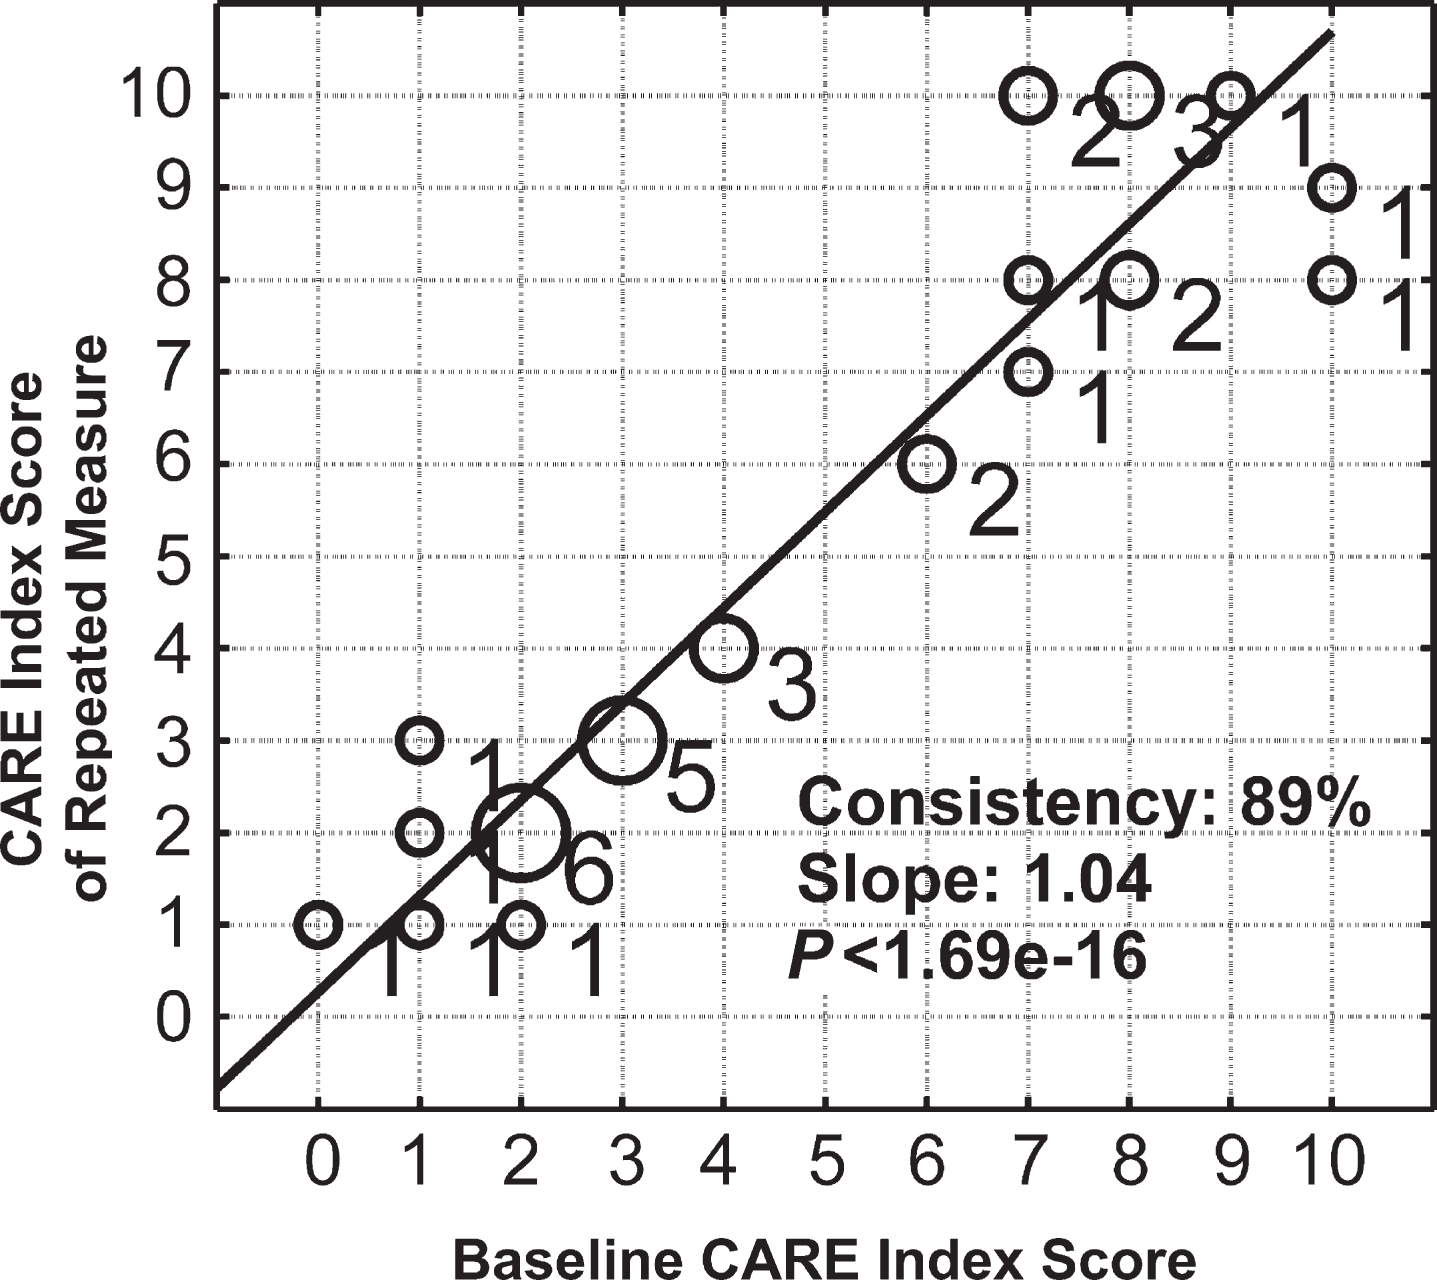 Intrasubject consistency of the CARE index score between repeated measures. The x-axis is individual’s baseline CARE index score, and the y-axis is the individual’s CARE index score from a measurement repeated within six months. Circle size and the number next to the circle represent the number of subjects falling on the same data point. The correlation value between two CARE index scores from repeated measurements is 89% with a slope of 1.04 (p < 1.69e-016).